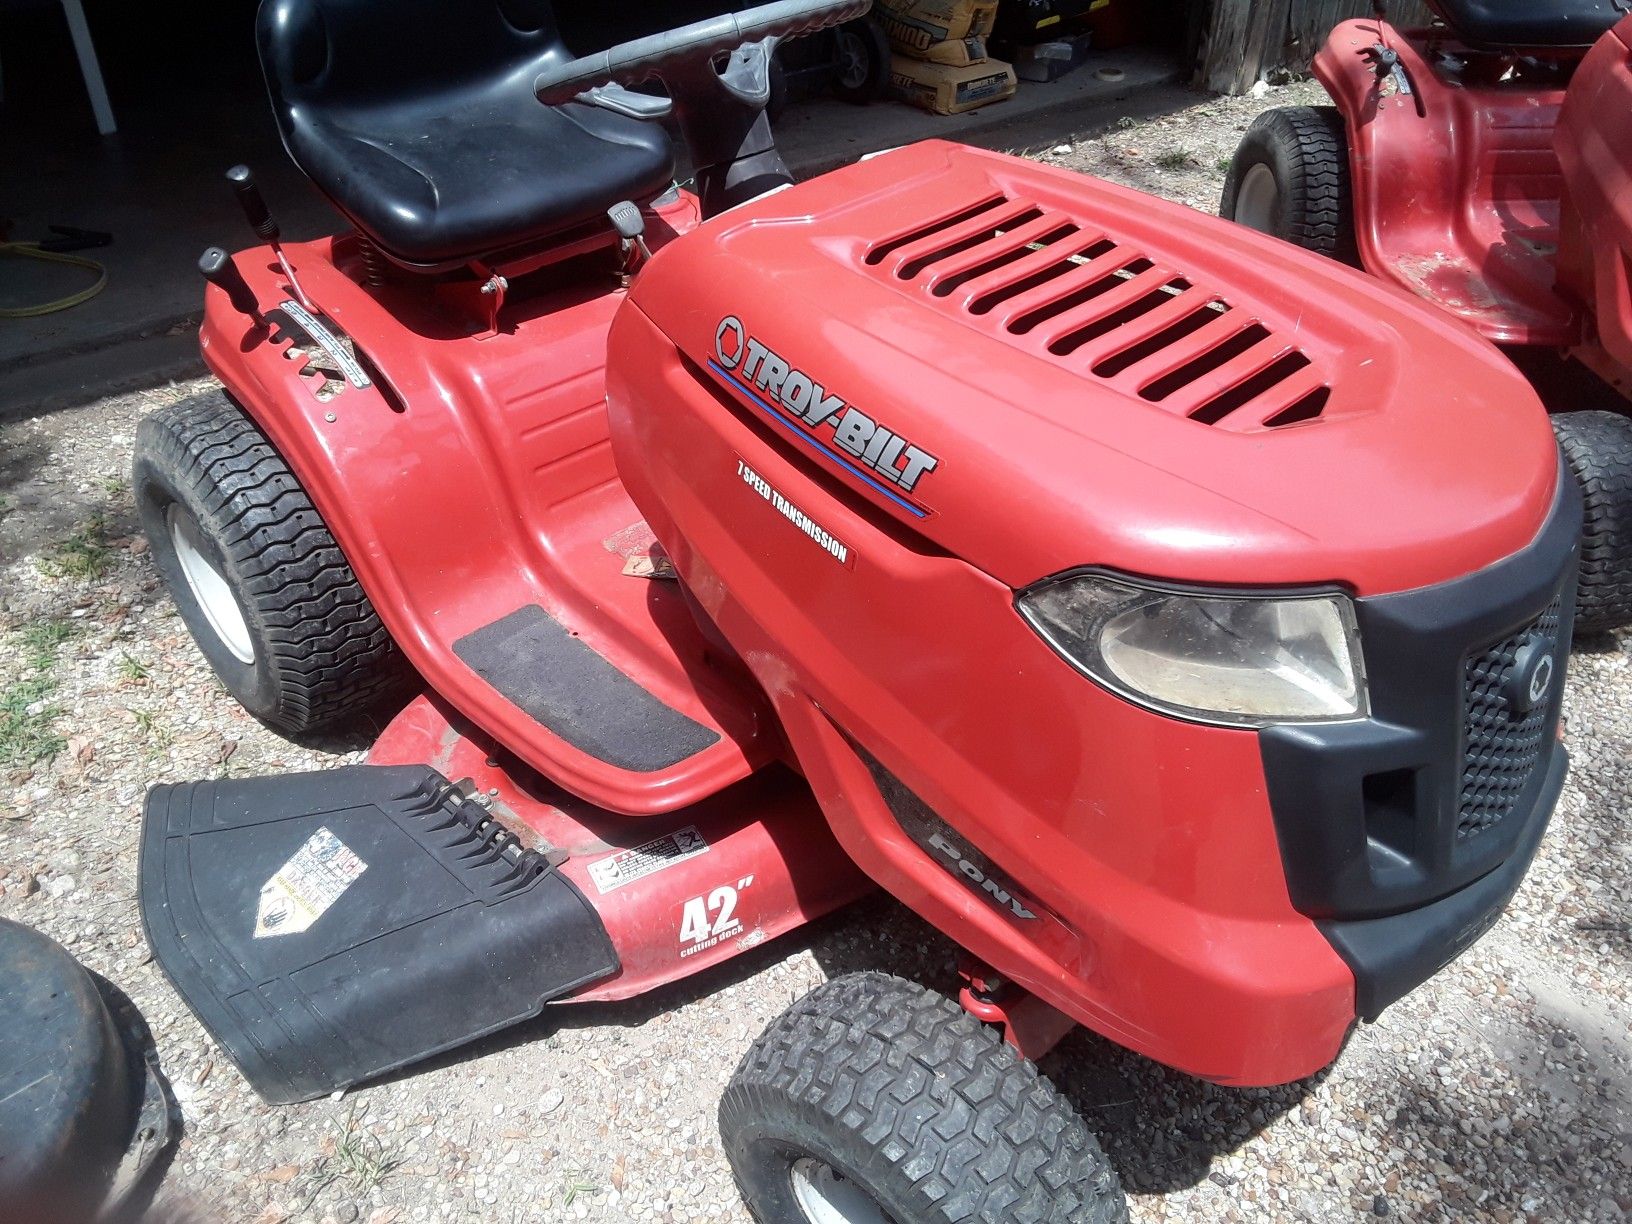 Riding mower not running not sure what all that needs $200